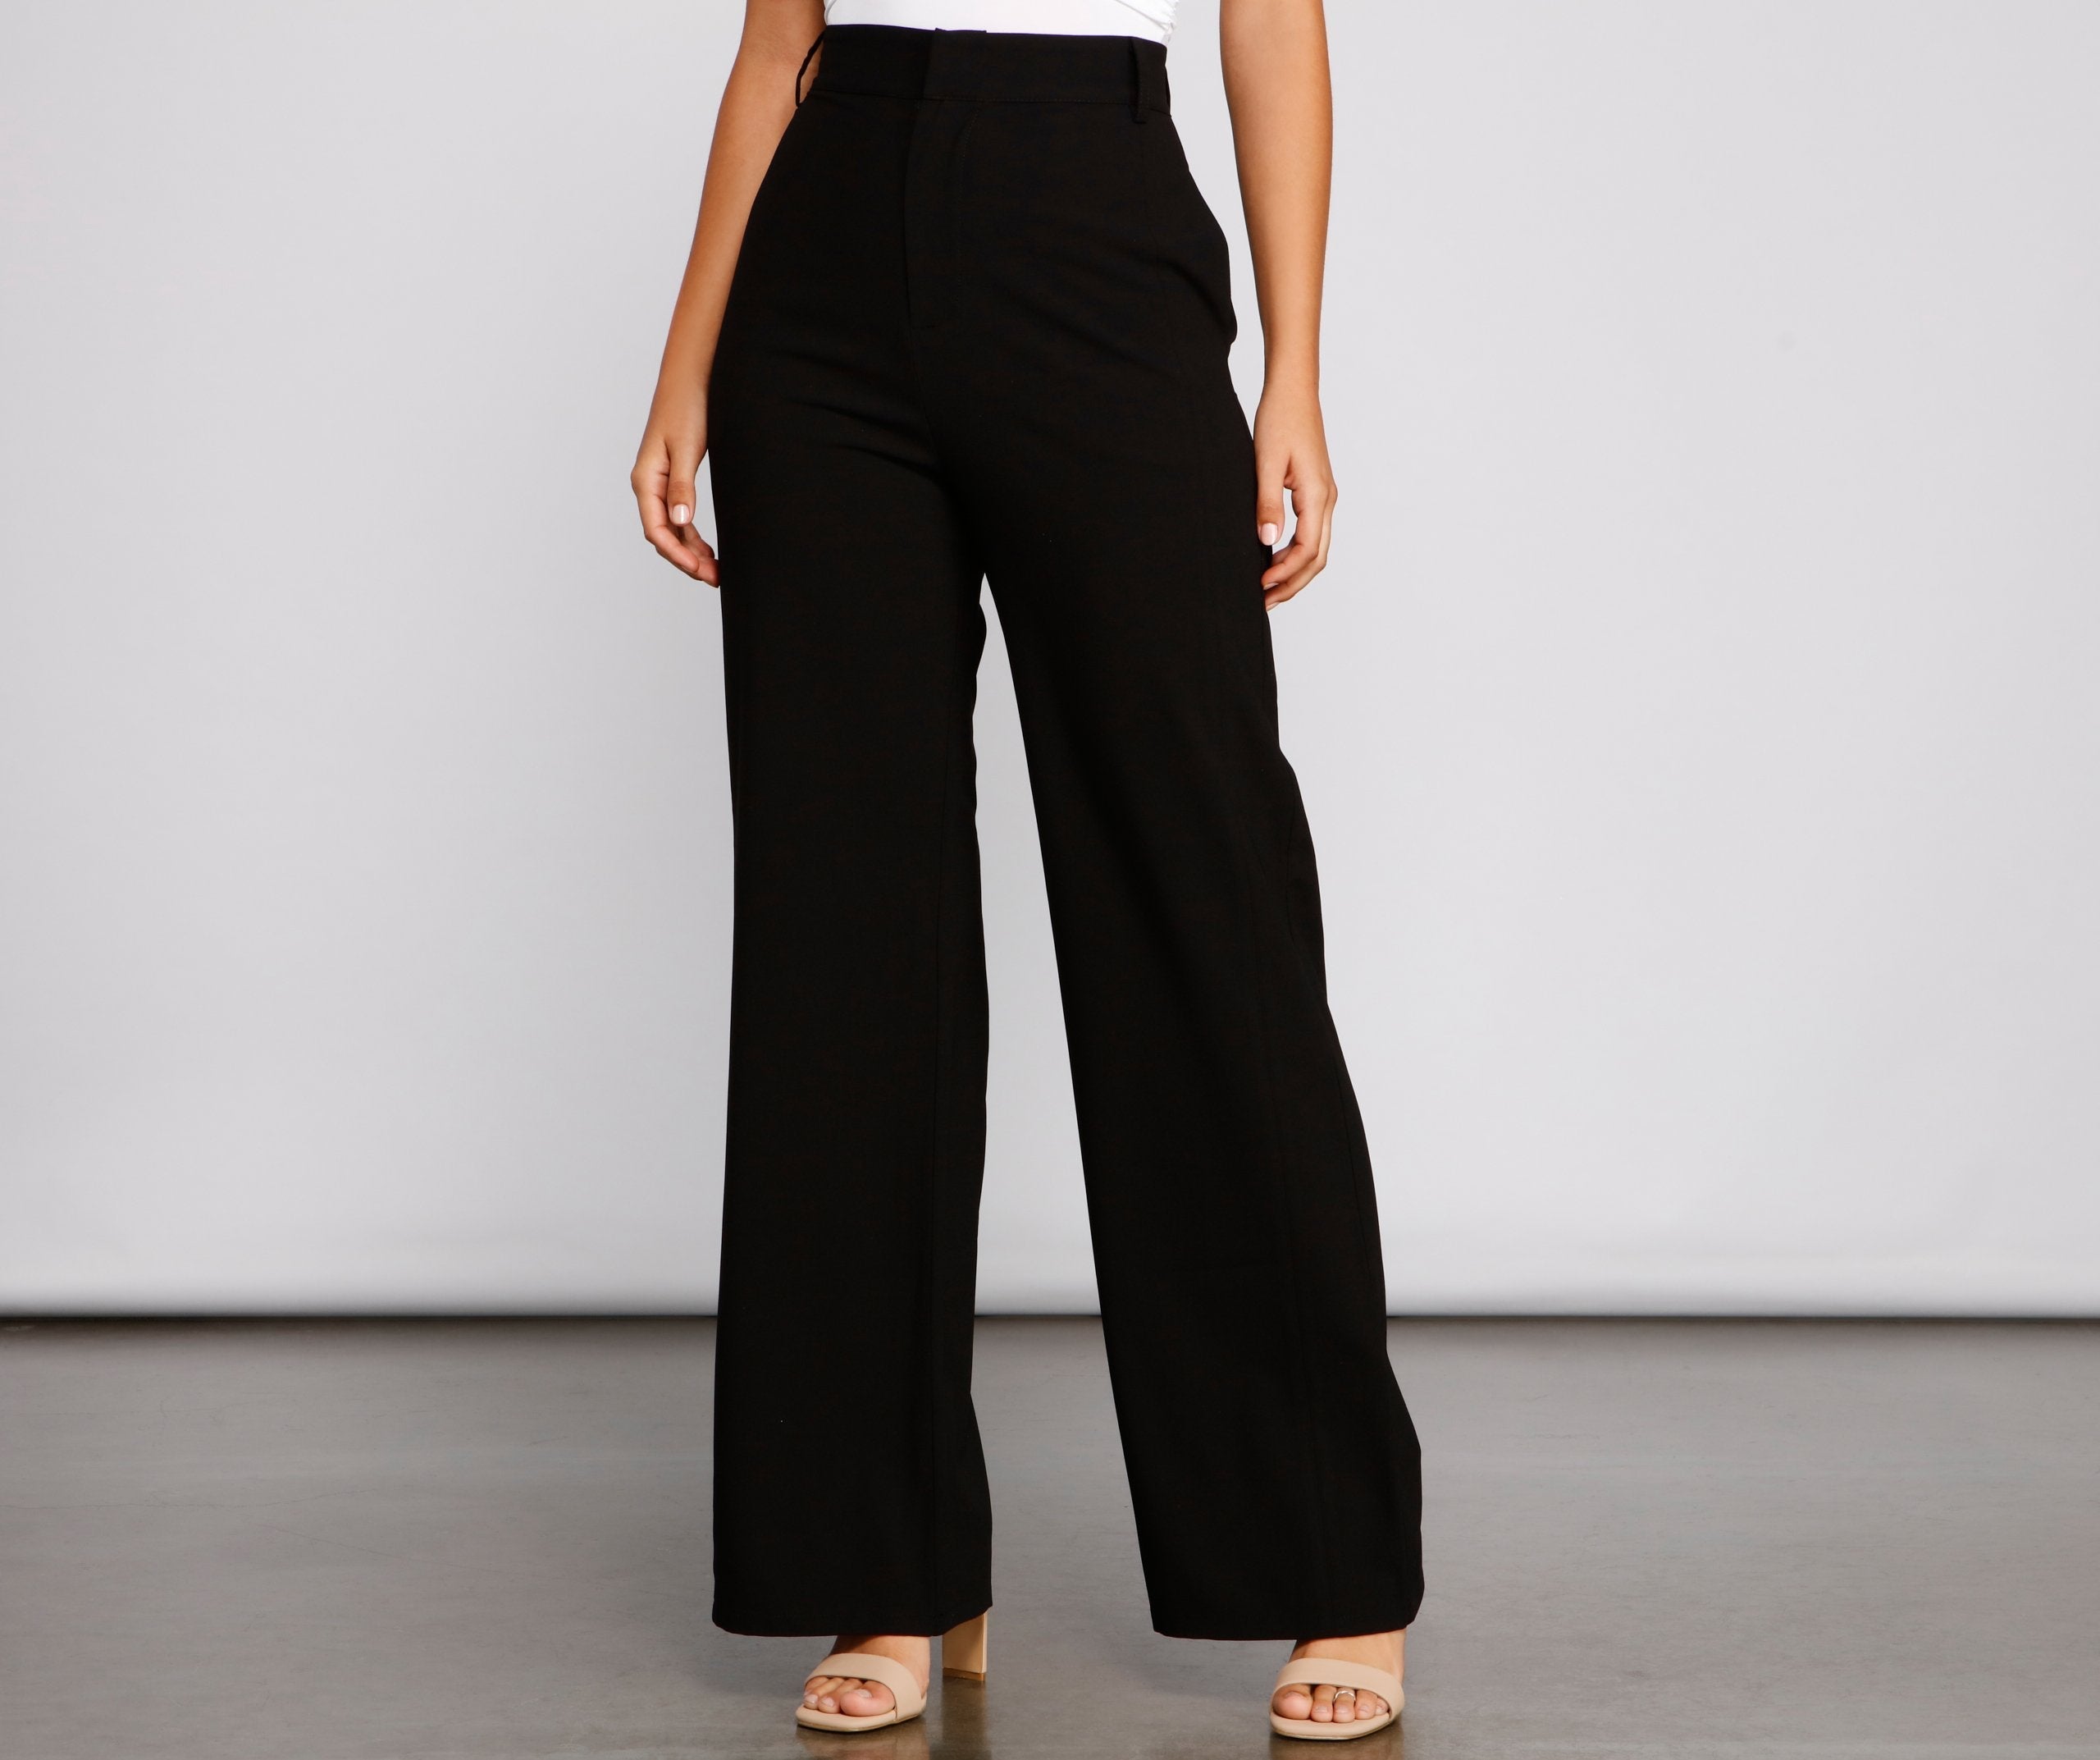 Bring The Flare High Waist Pants